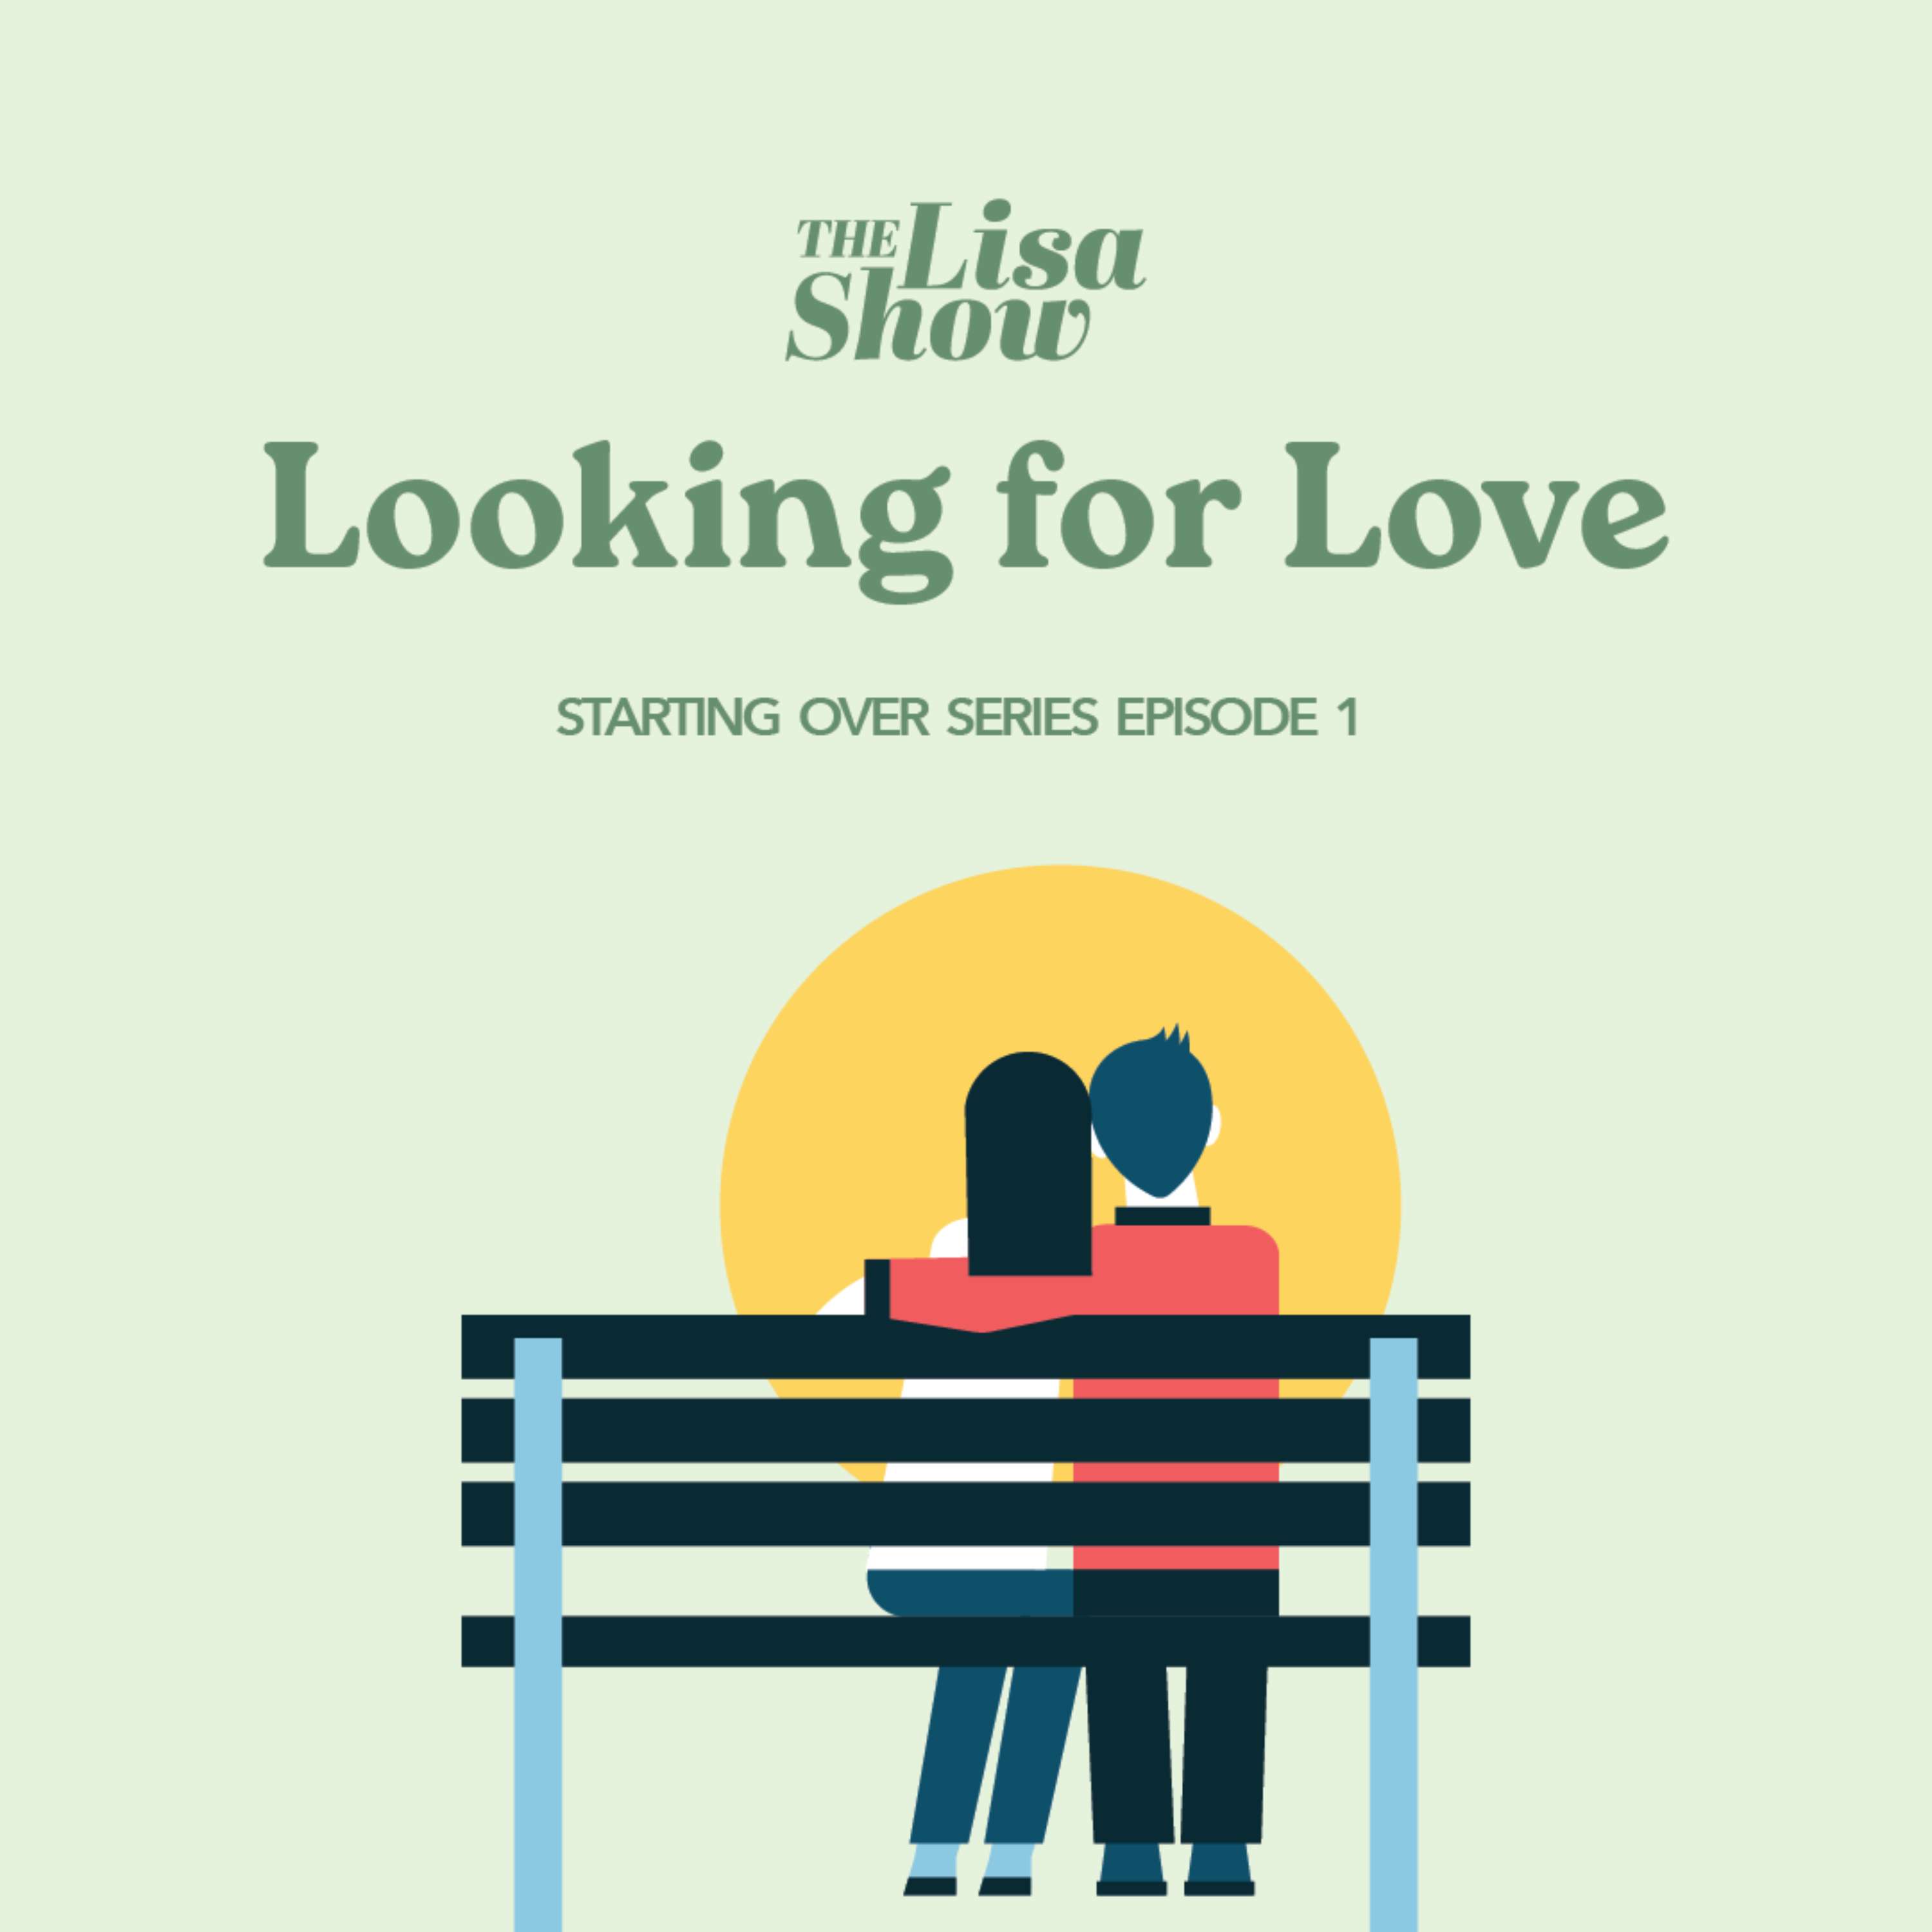 Starting Over E1: Looking for Love